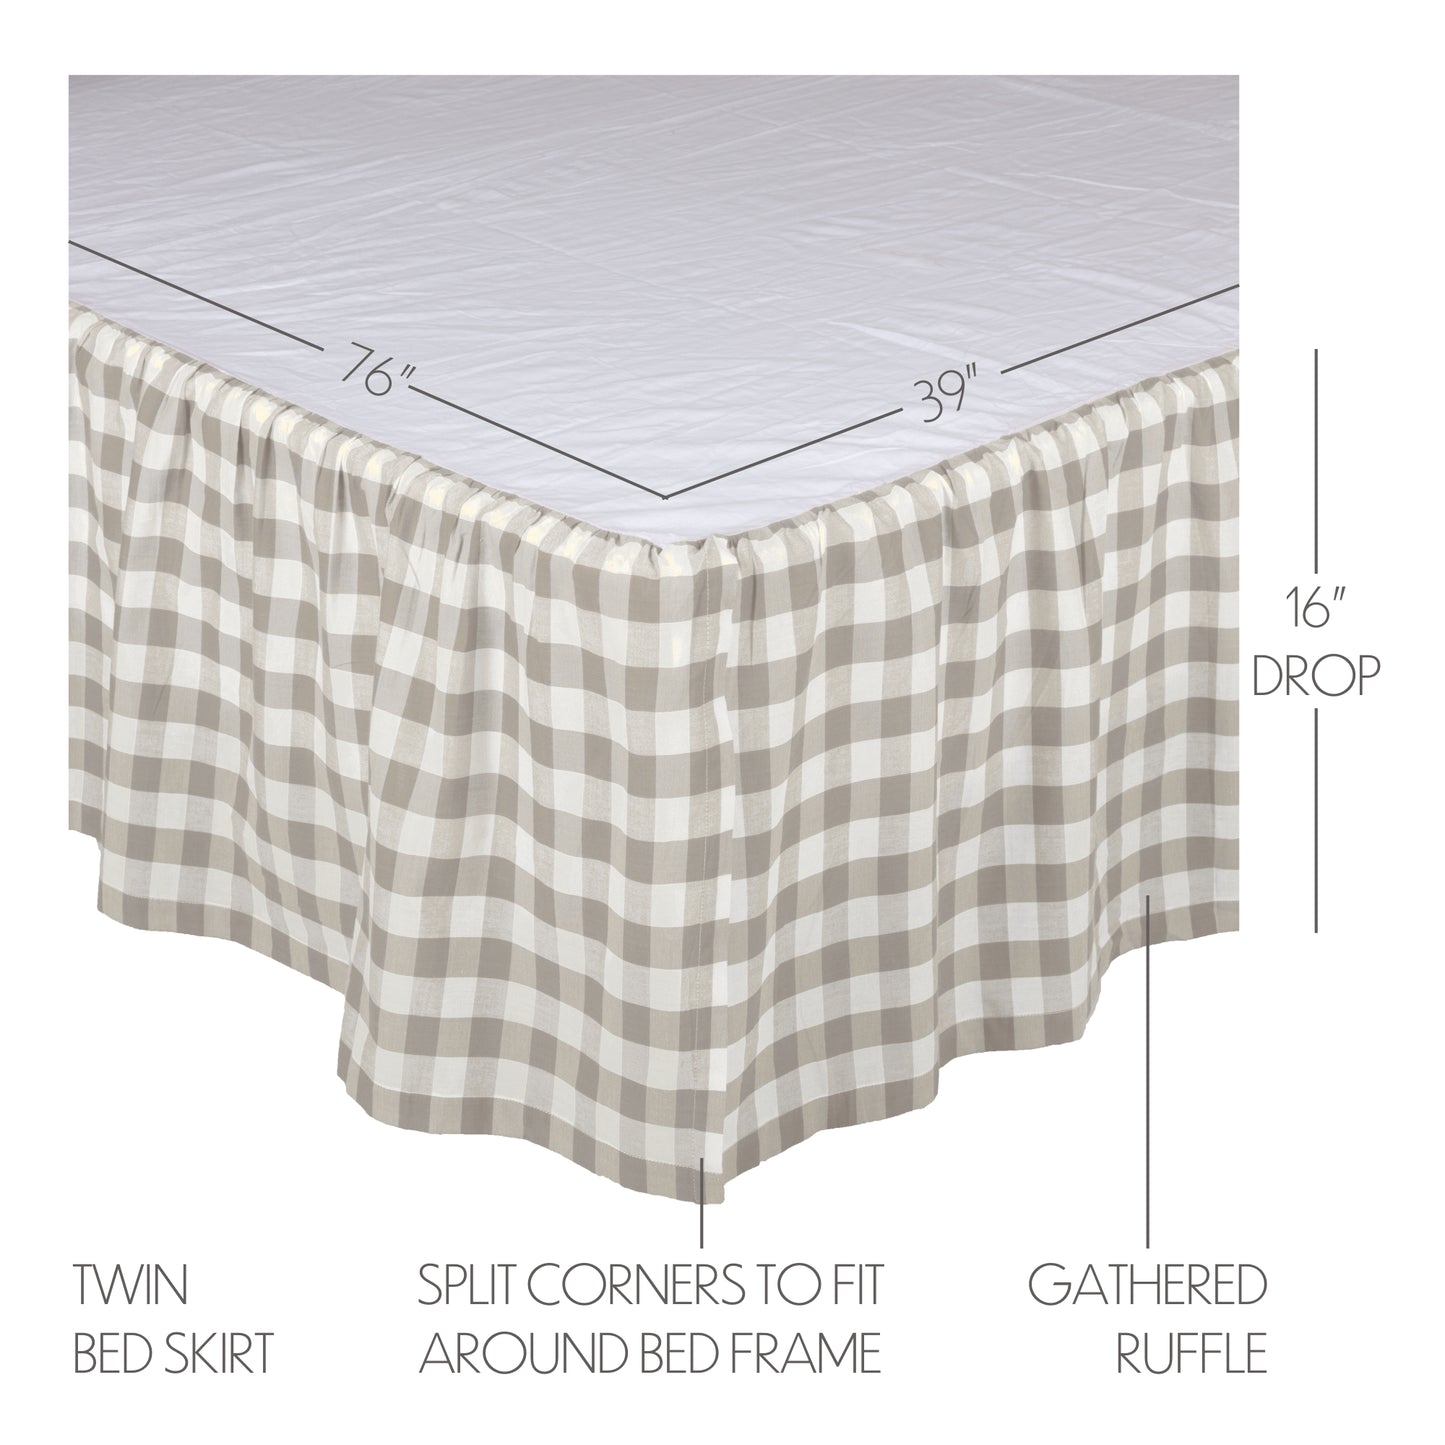 40411-Annie-Buffalo-Grey-Check-Twin-Bed-Skirt-39x76x16-image-1